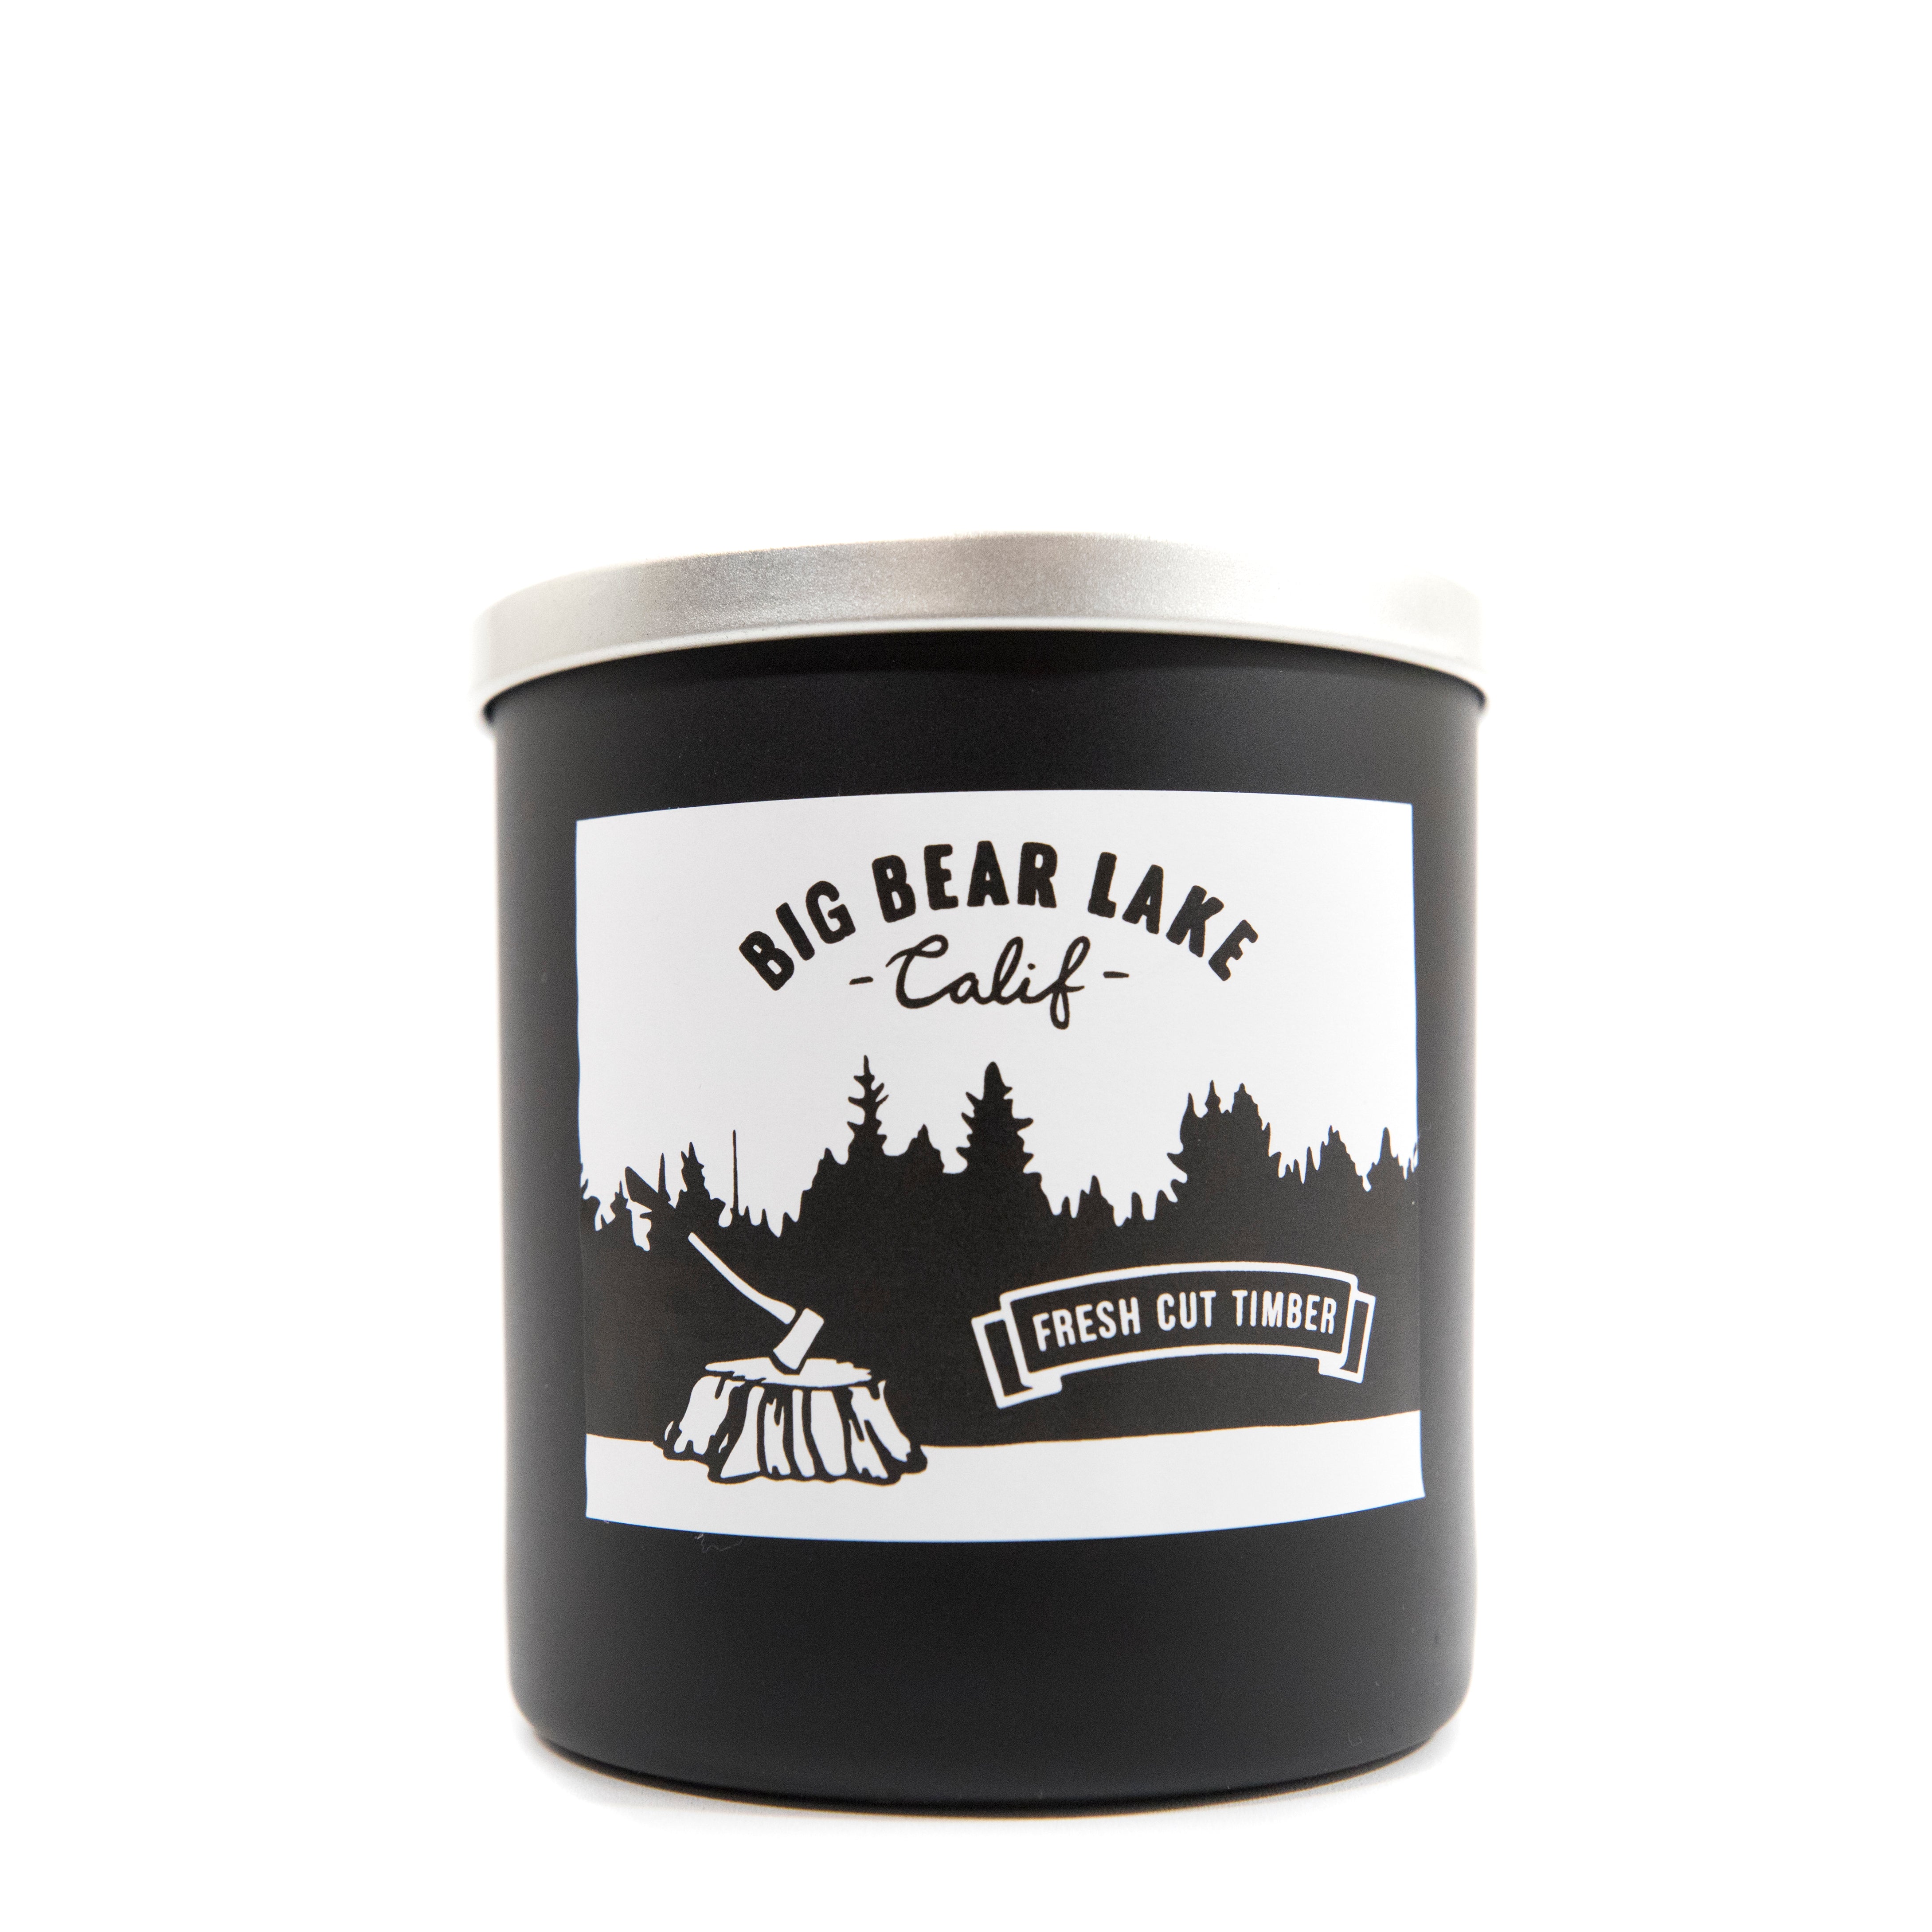 Big Bear Lake Fresh Cut Timber Candle - Custom Logo - Coconut Wax - Paraben Free - Food Grade Certified Coconut Oil - Sustainable Wax - Essential Oil Blends - Women's Clothing Store - Boutique - O KOO RAN - Big Bear Lake California